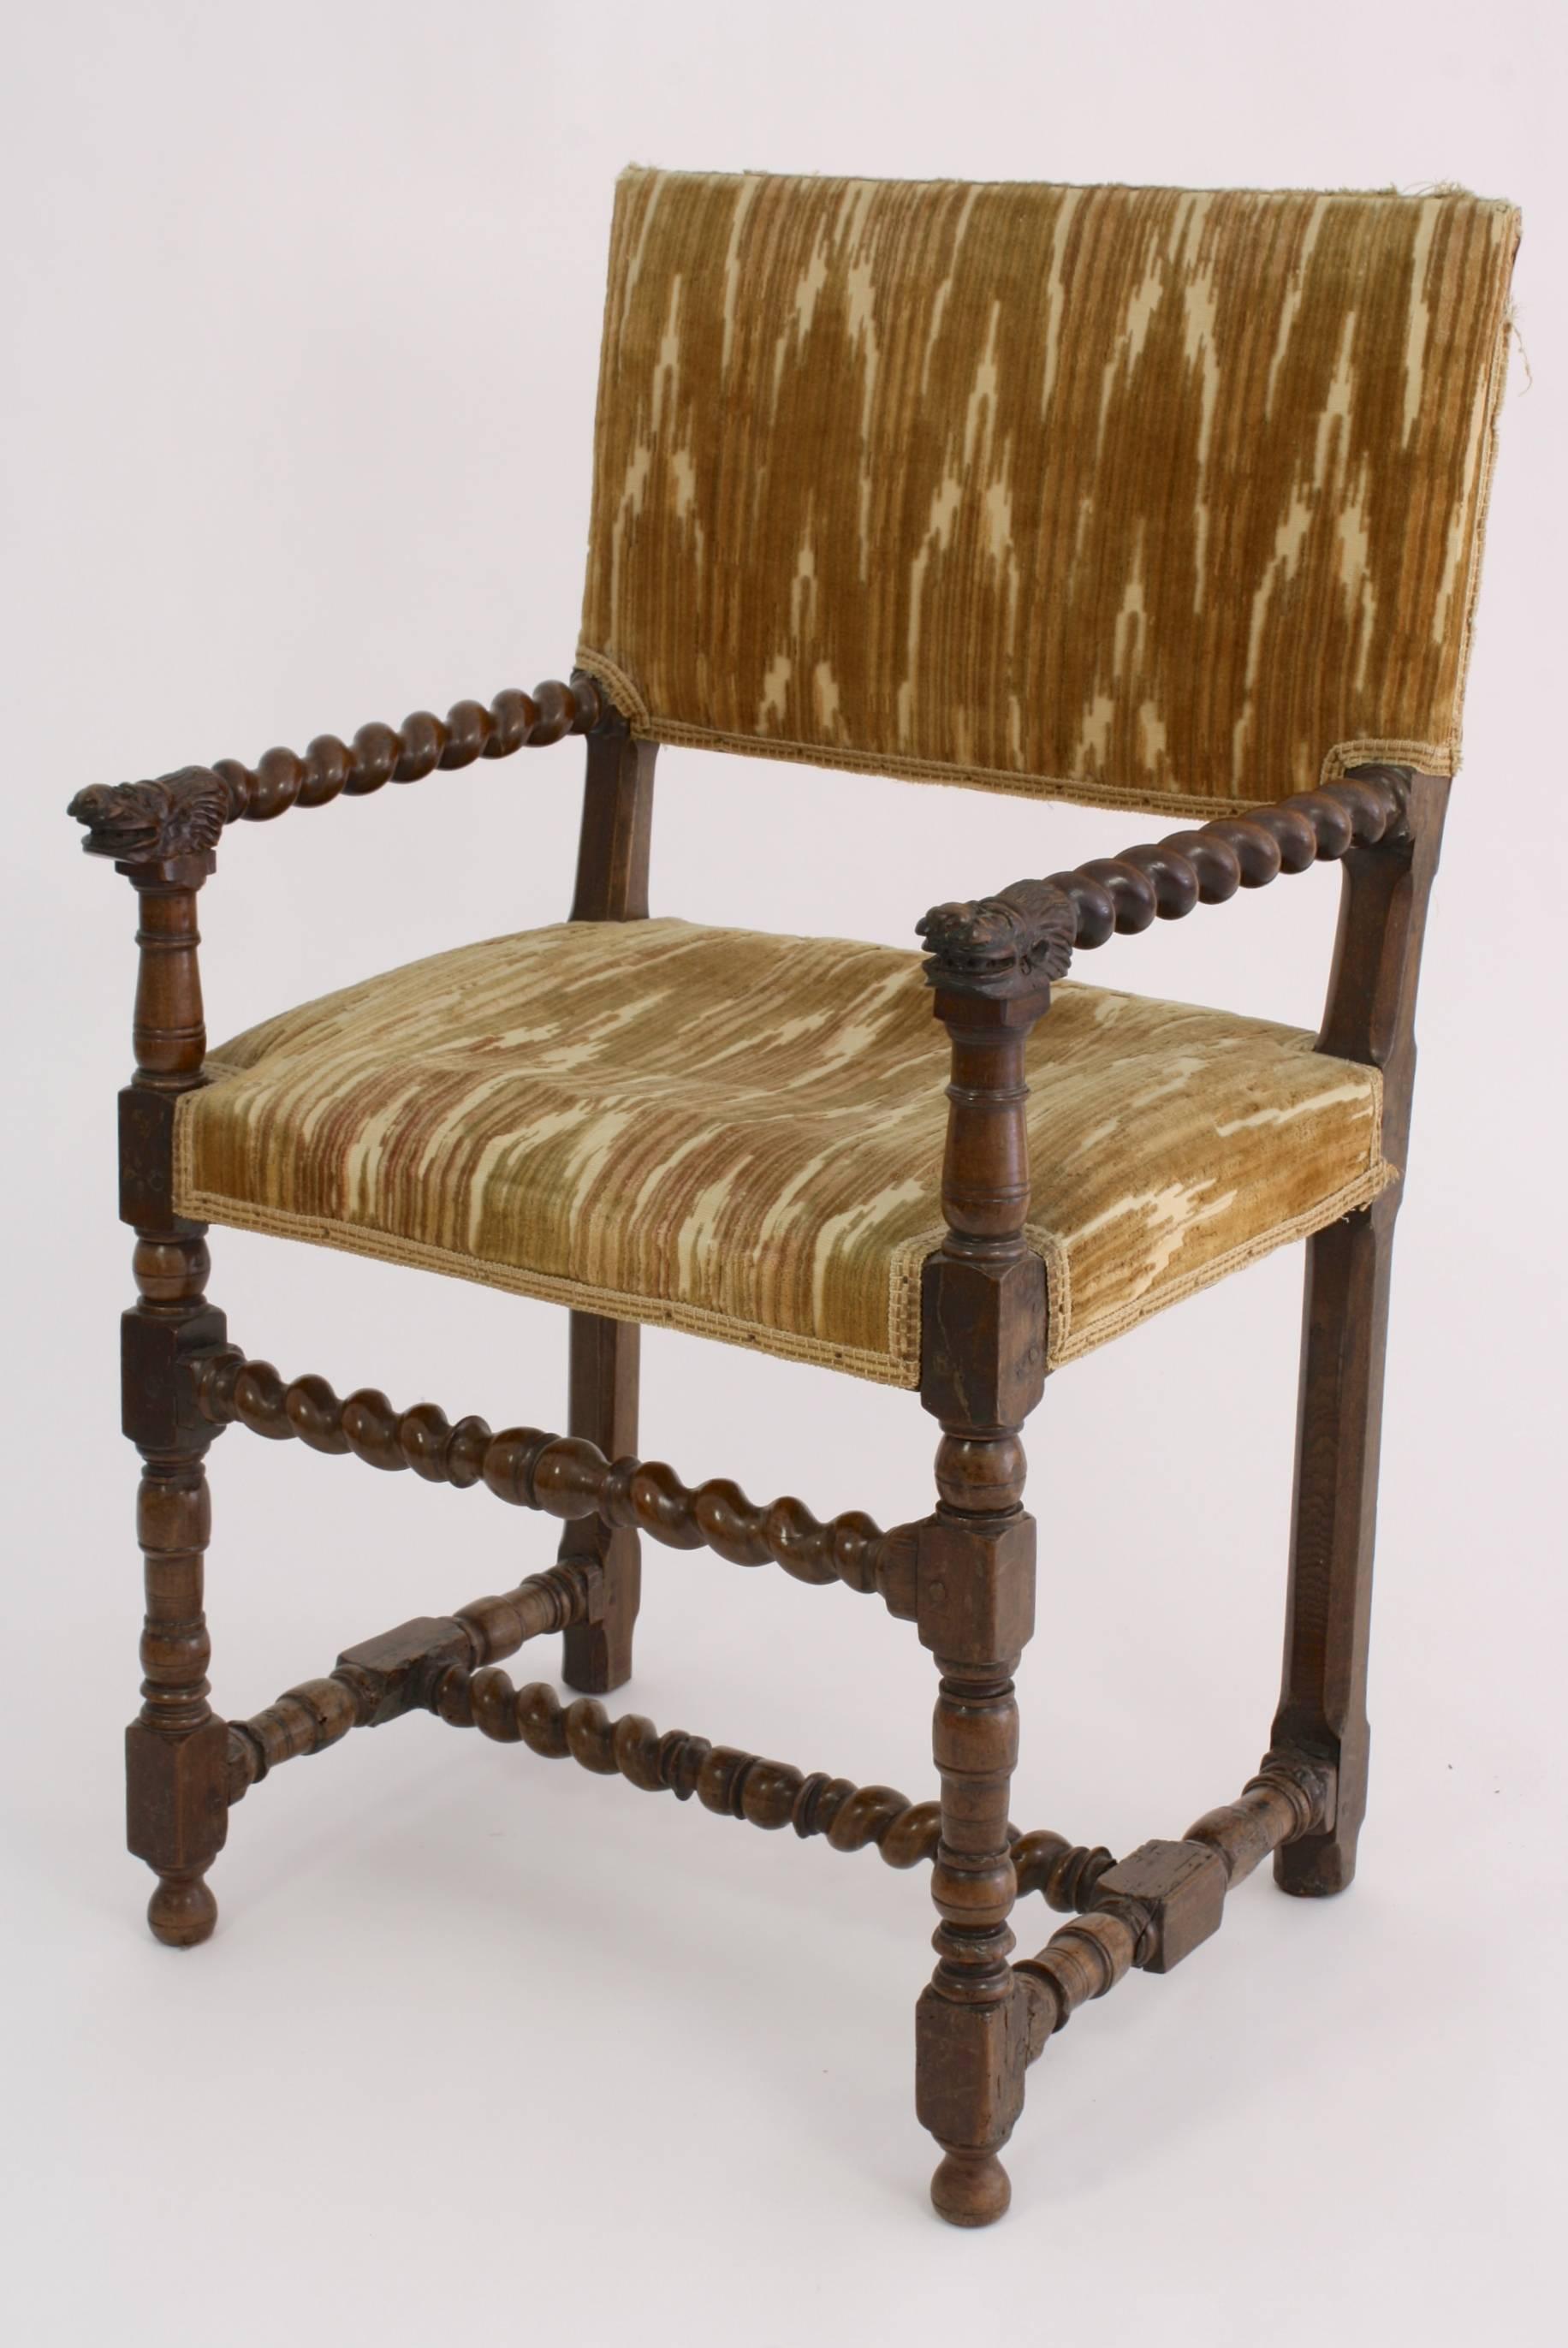 Louis XIII period walnut fauteuil or armchair with barley arms ending in carved lions' heads.  Other elements are turned or carved barley twist designs.  Appears that at least the rear right leg may have been replaced.  Vintage patterned silk velvet